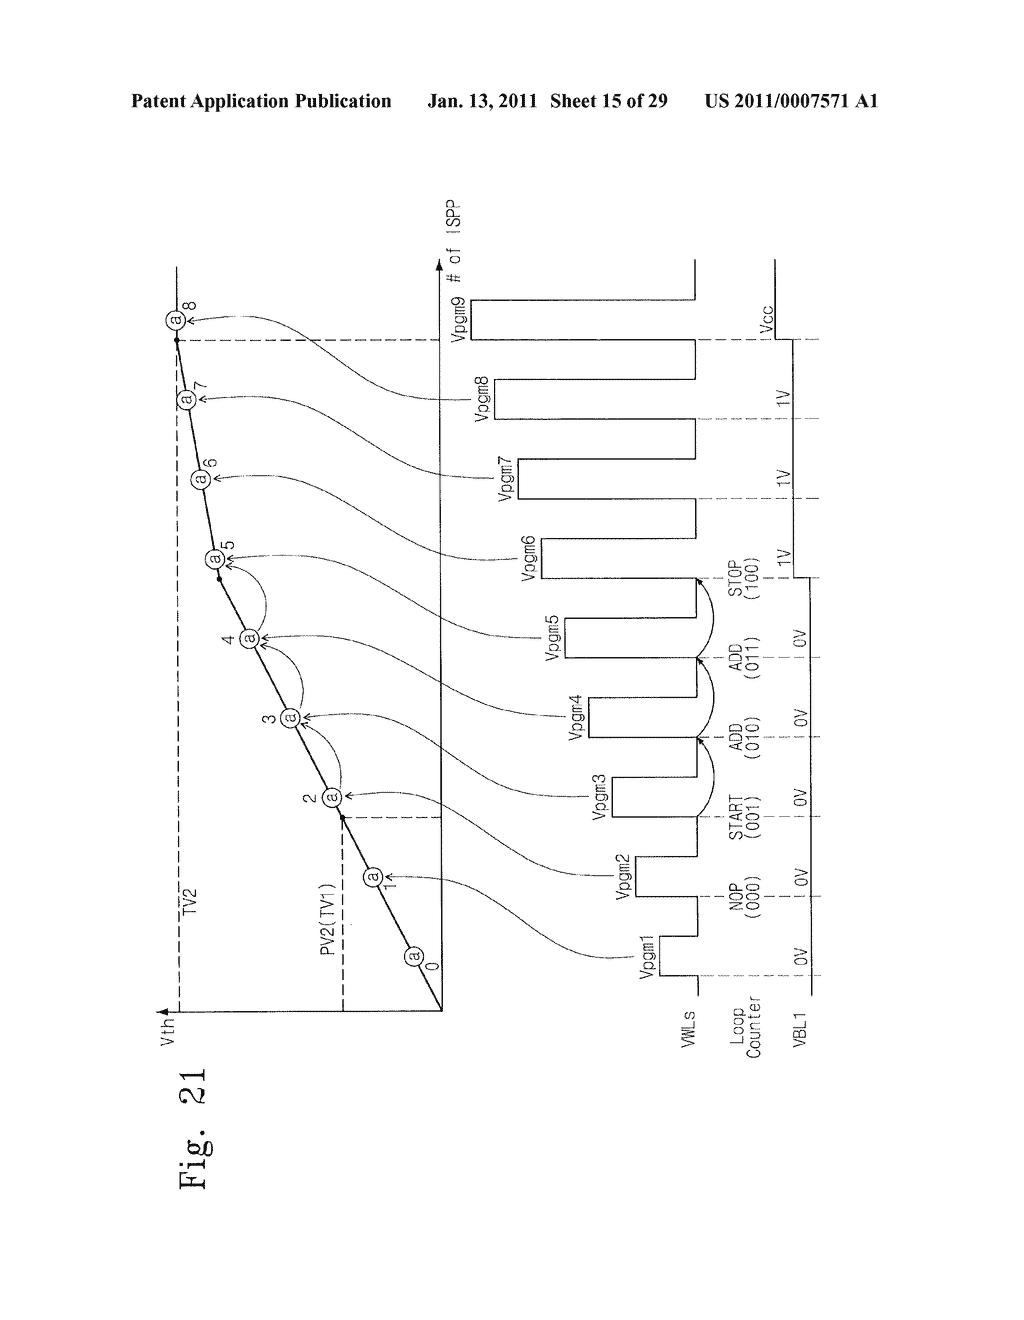 NONVOLATILE MEMORY DEVICES AND PROGRAM METHODS THEREOF IN WHICH A TARGET VERIFY OPERATION AND A PRE-PASS VERIFY OPERATION ARE PERFORMED SIMULTANEOUSLY USING A COMMON VERIFY VOLTAGE - diagram, schematic, and image 16